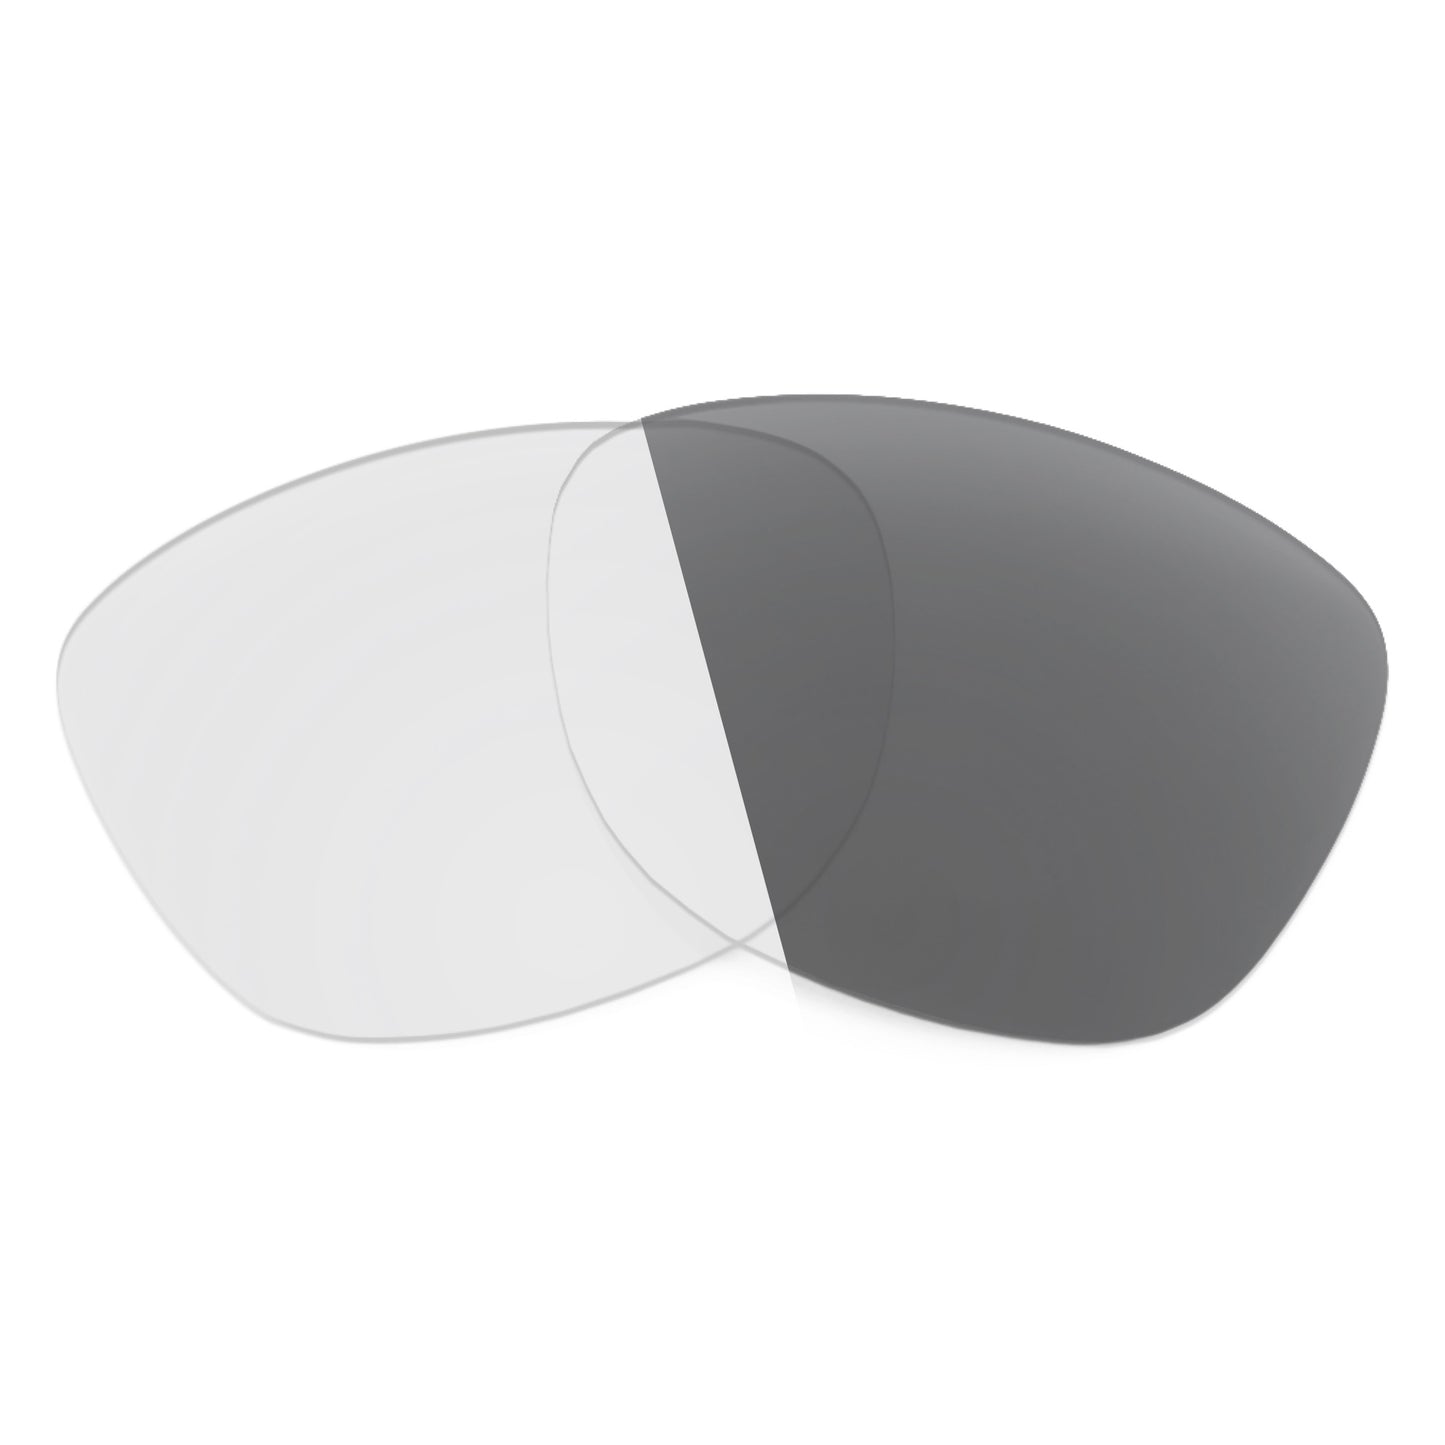 Revant replacement lenses for Ray-Ban RB4259 51mm Non-Polarized Adapt Gray Photochromic